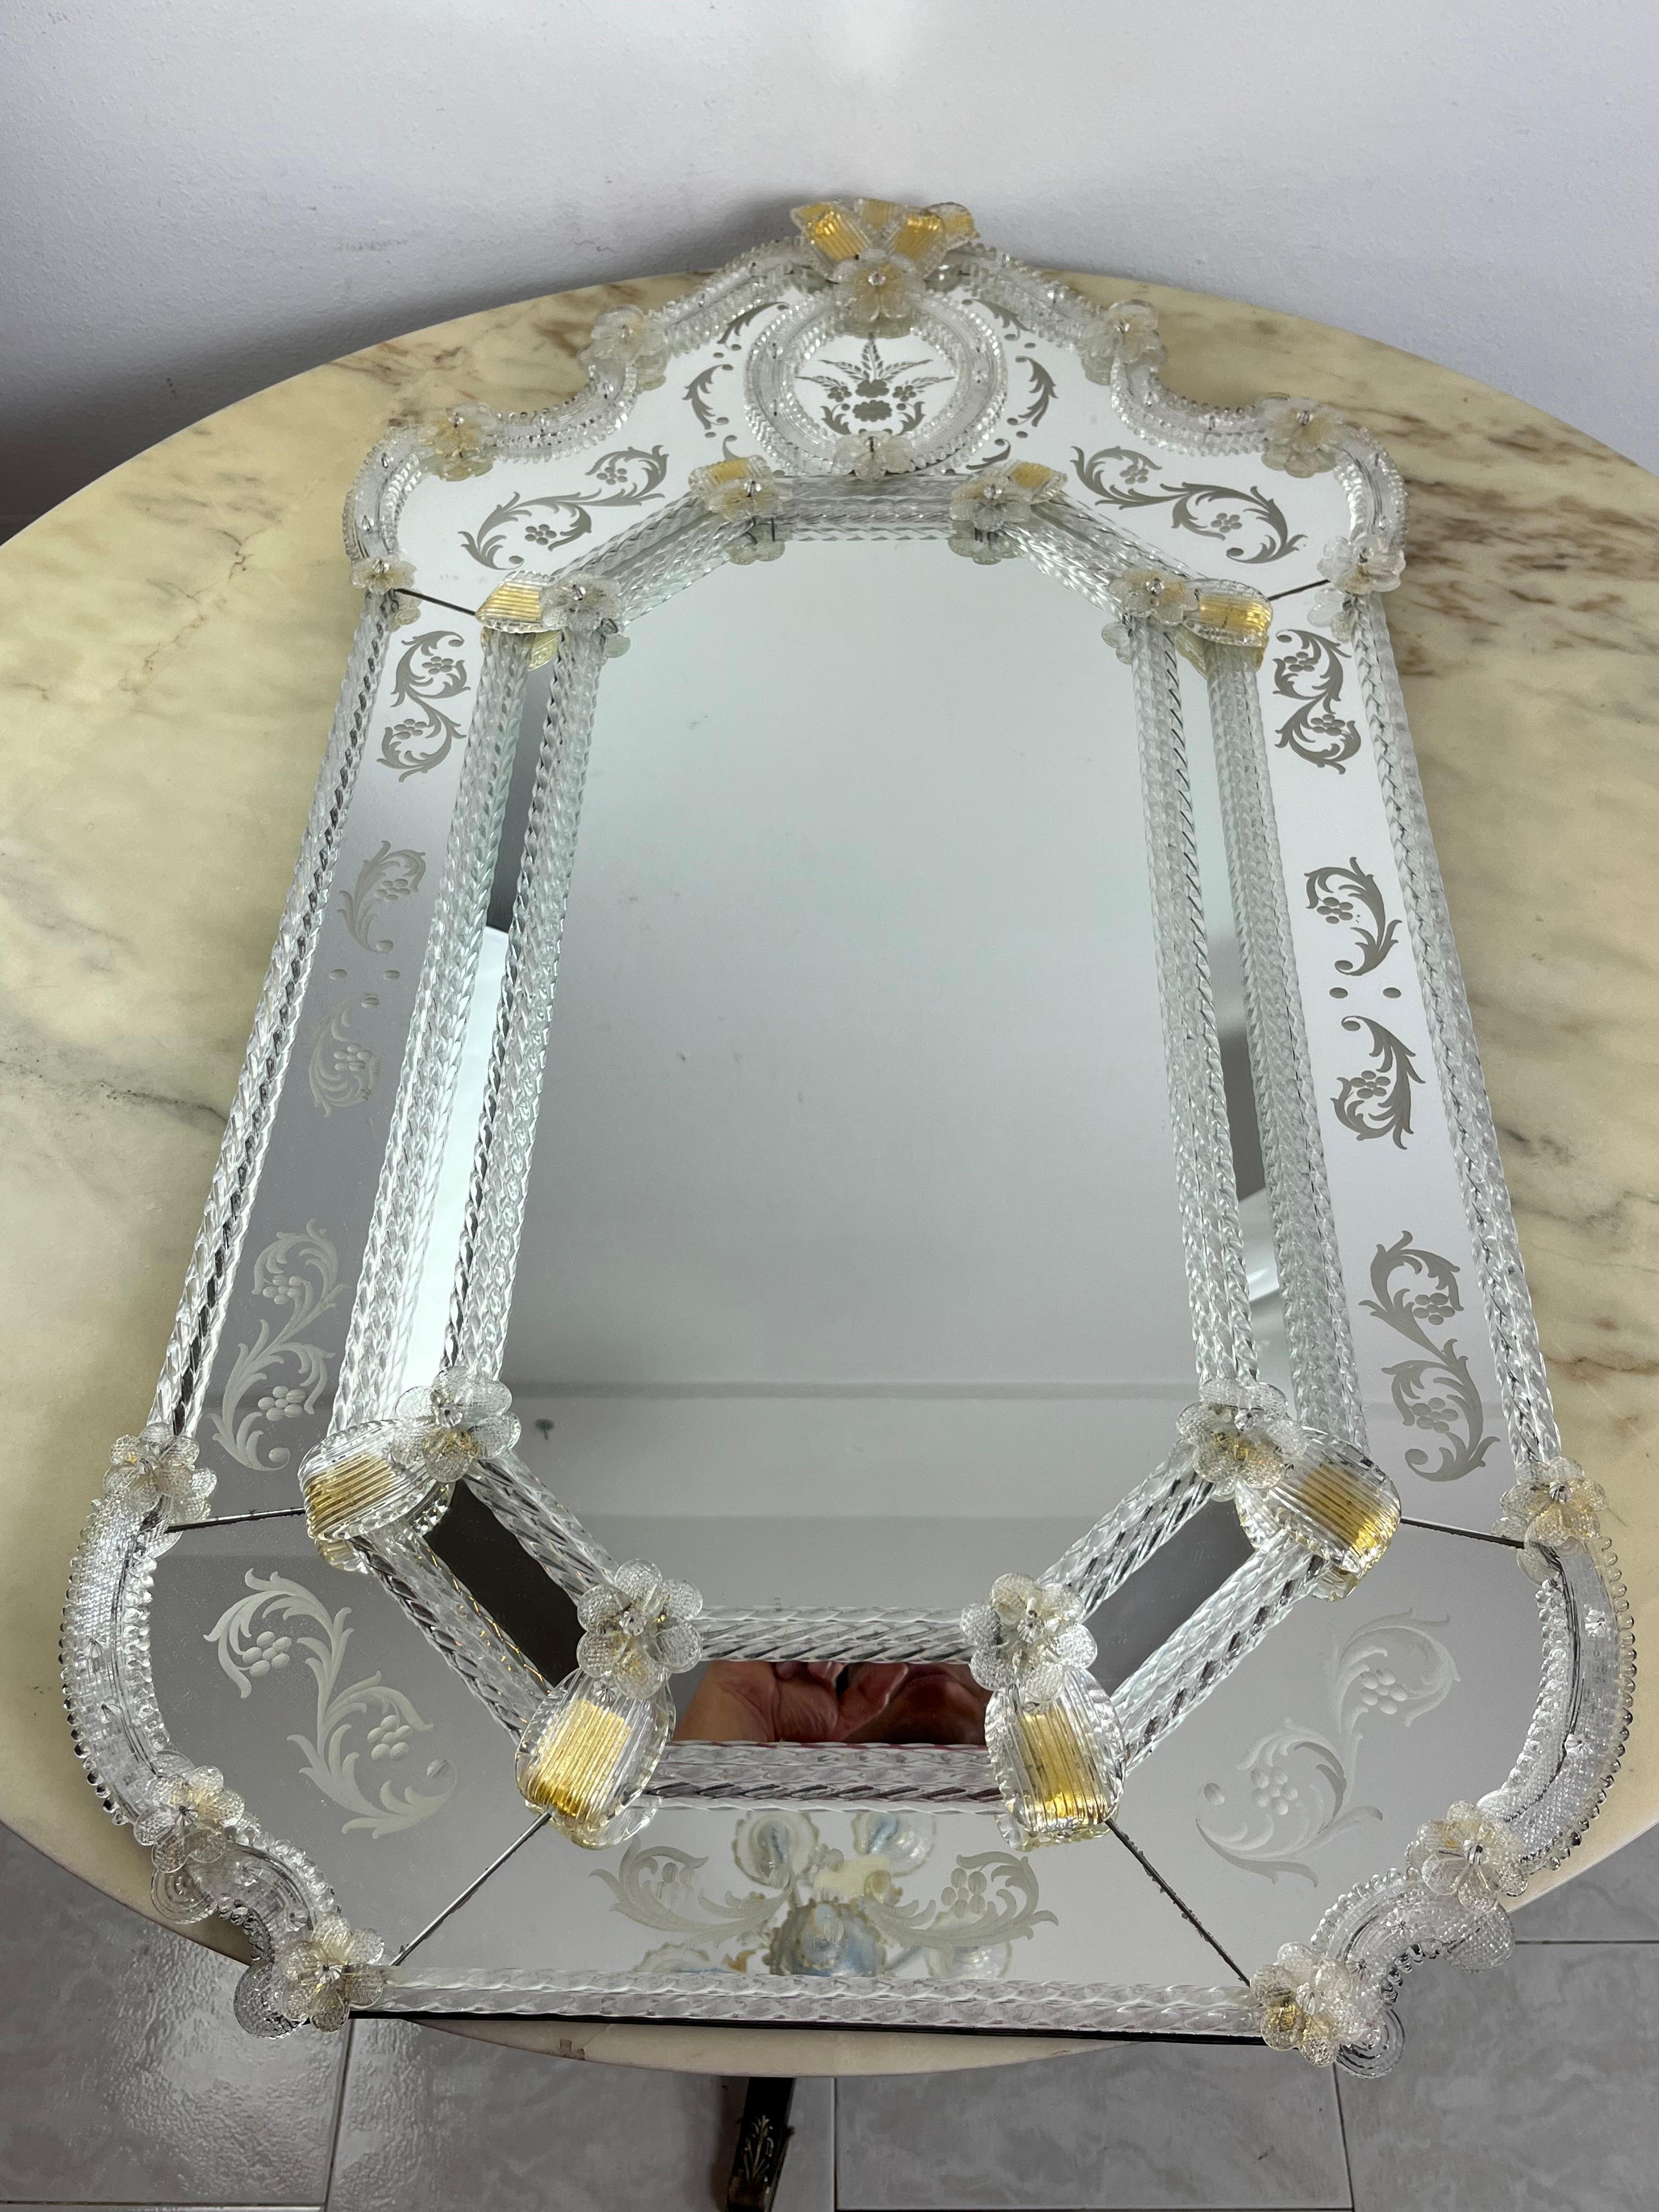 Mid-Century Venetian Murano glass mirror attributed to Ercole Barovier 1960s
Intact and in excellent condition, found in a noble apartment. Small signs of aging.